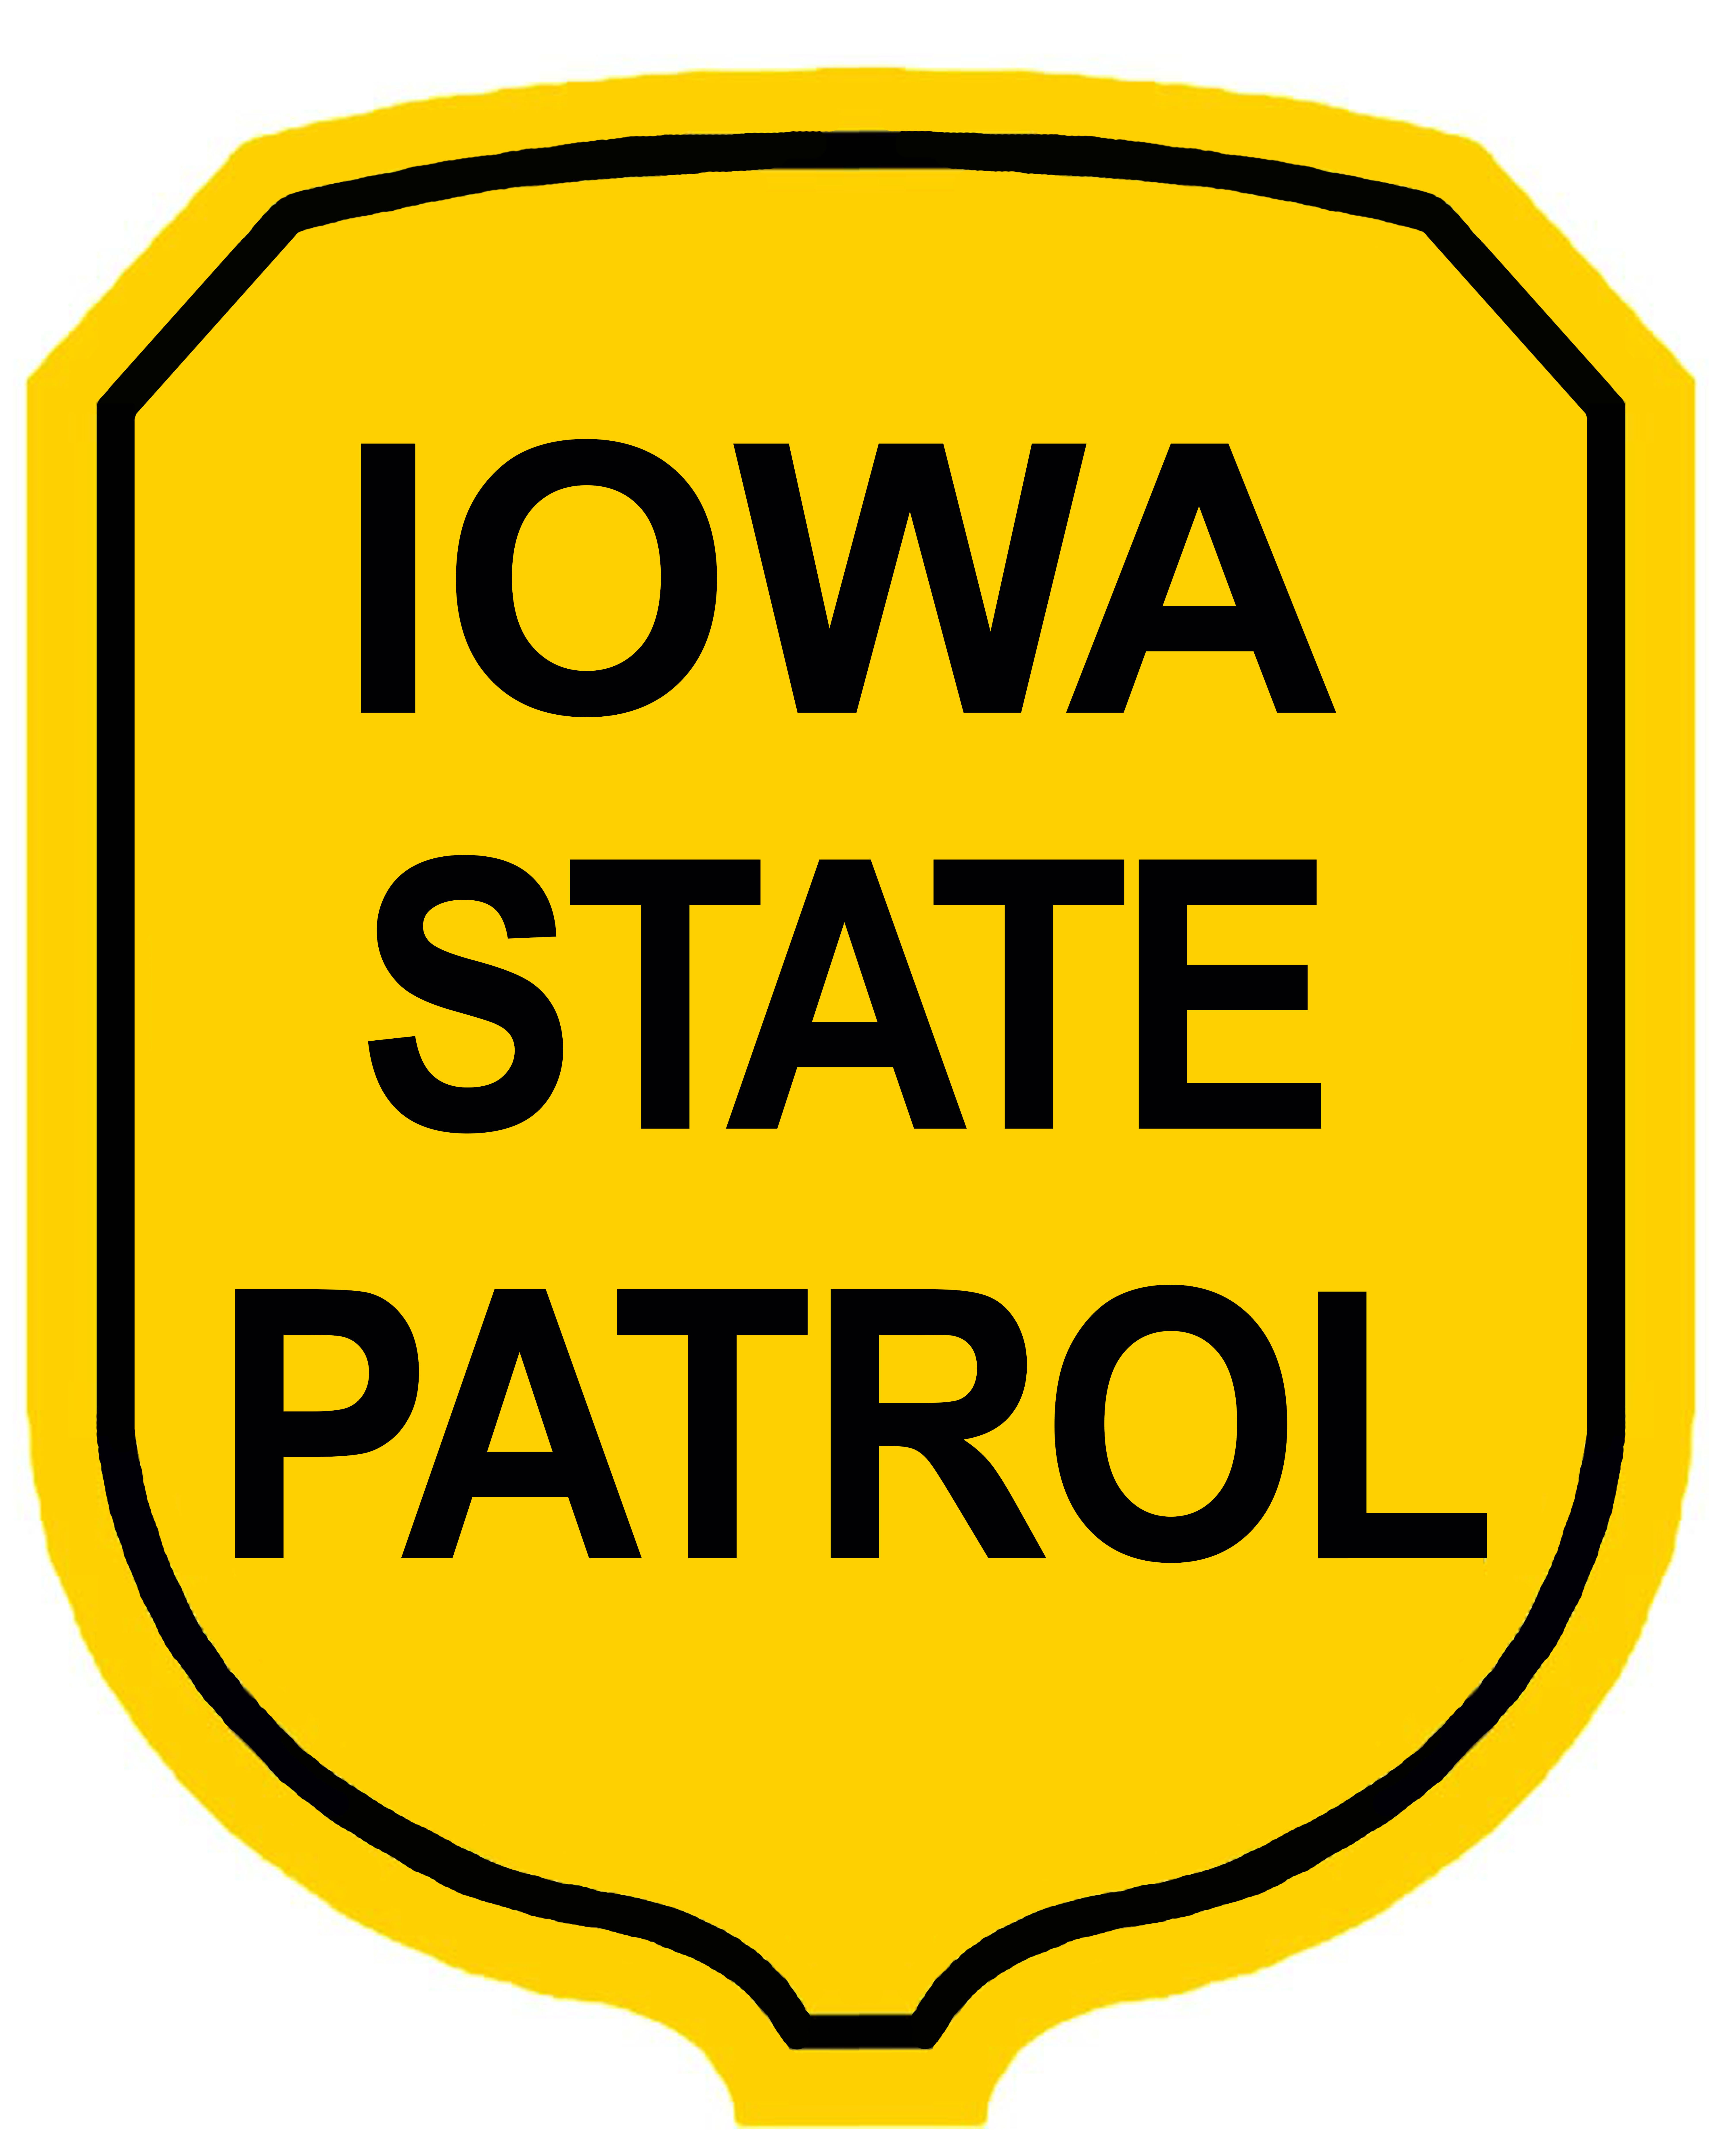 Iowa State Patrol
Commercial Motor Vehicle Unit
